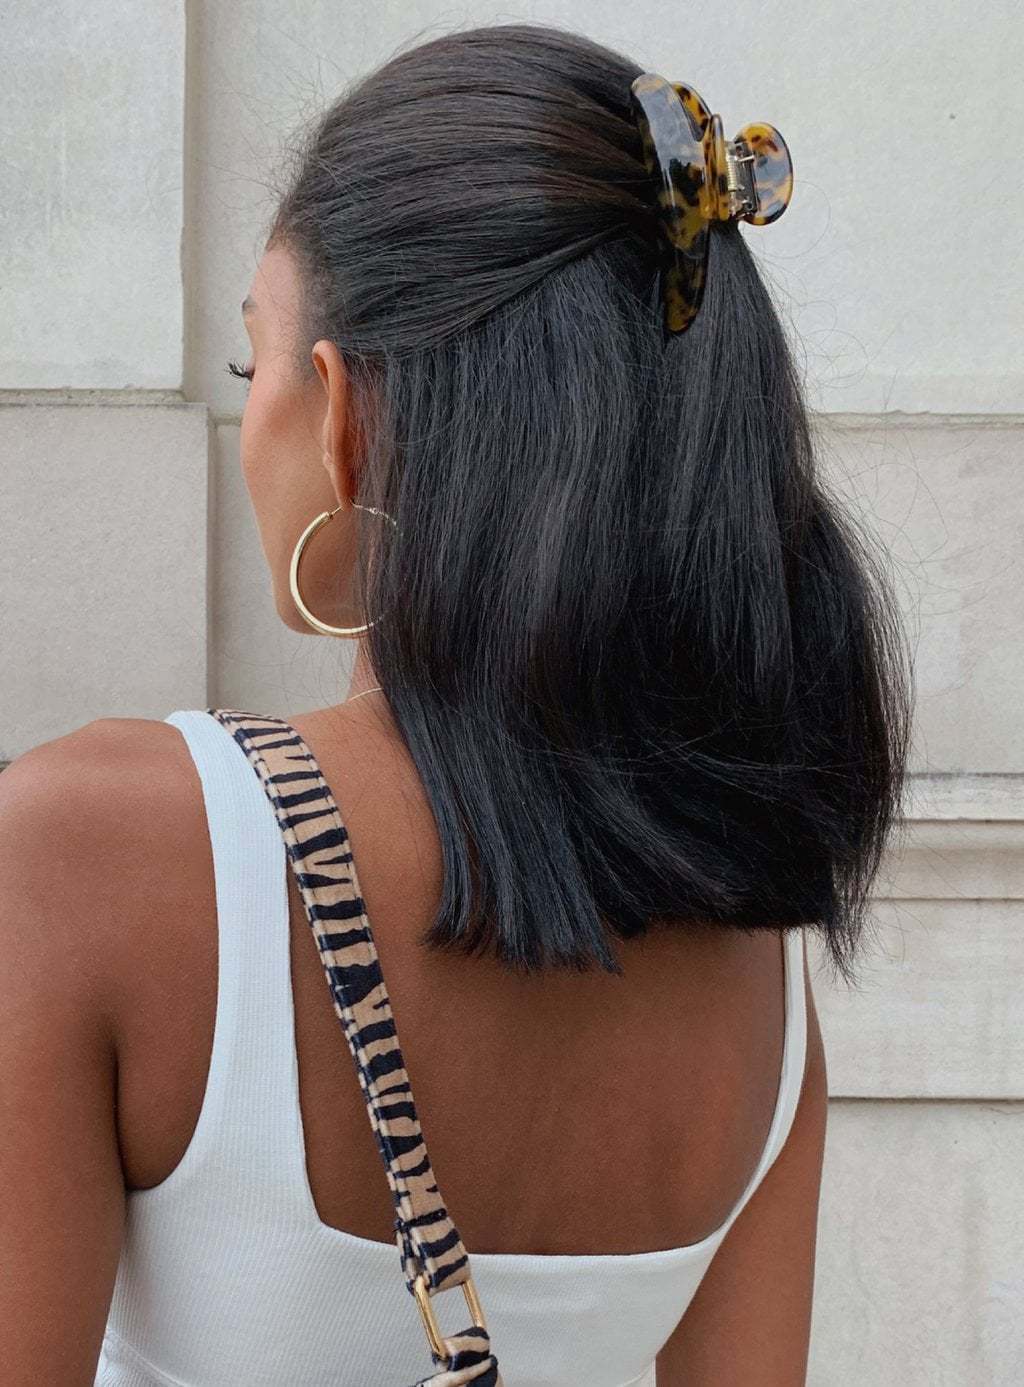 15 Cute Hairstyles for Short Hair to Try ASAP - College Fashion